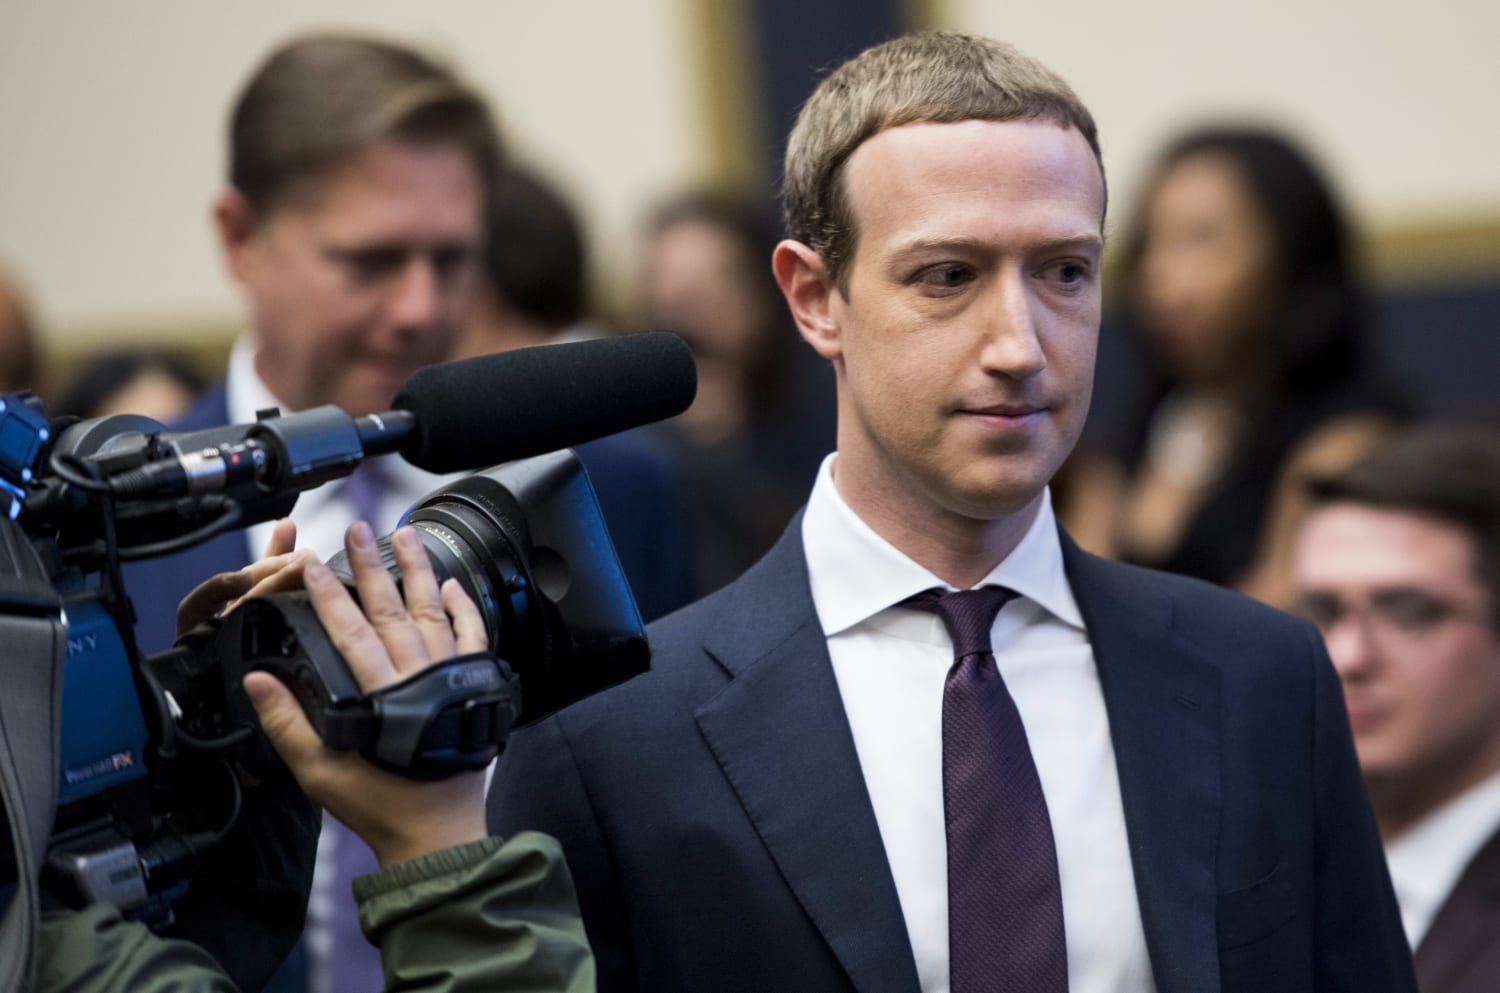 Civil rights leaders say they're 'disappointed and stunned' after call with Facebook's Zuckerberg and Sandberg